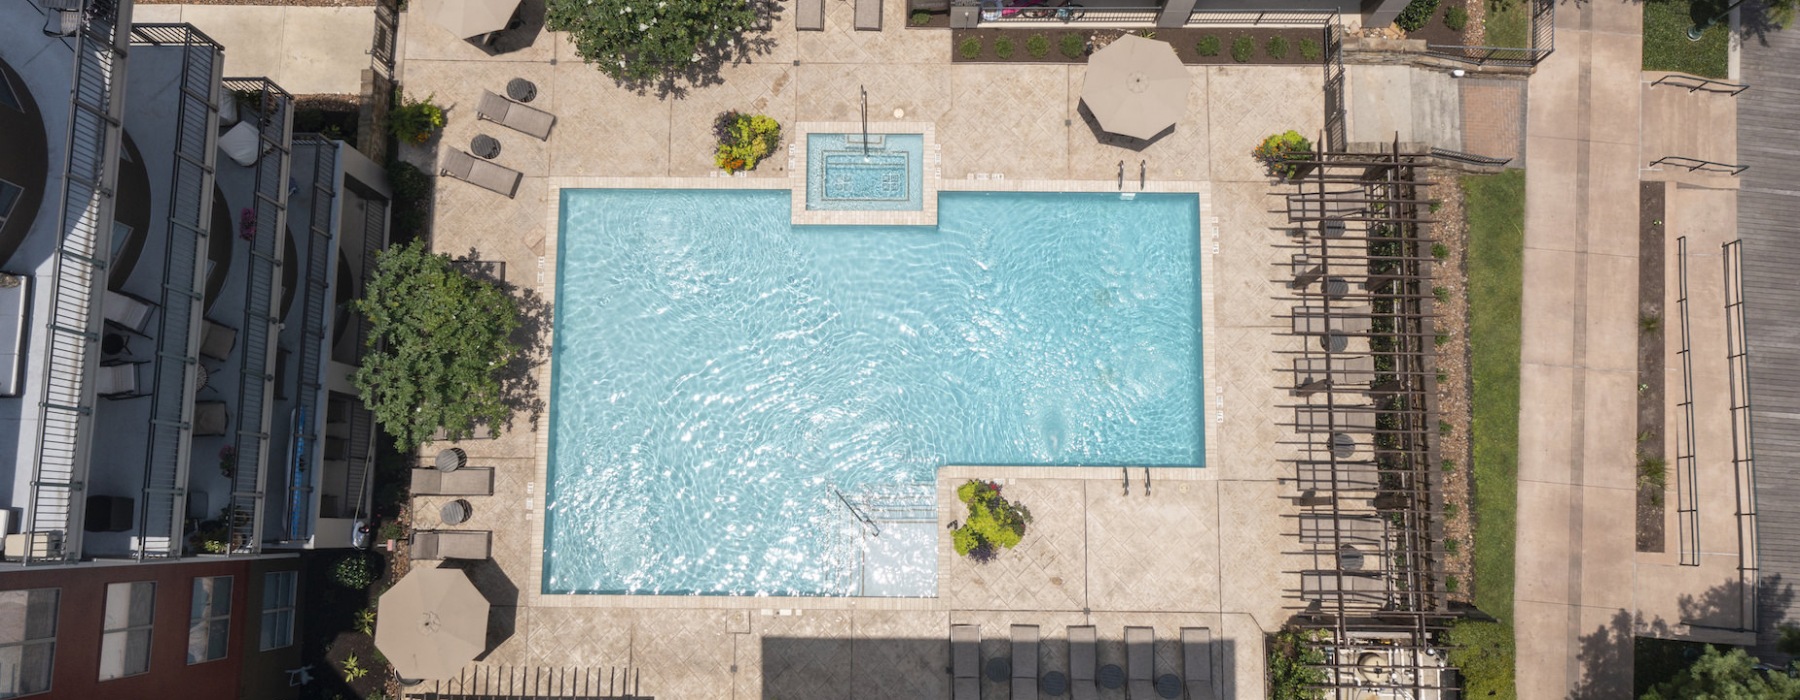 aerial of pool, courtyard and landscaping